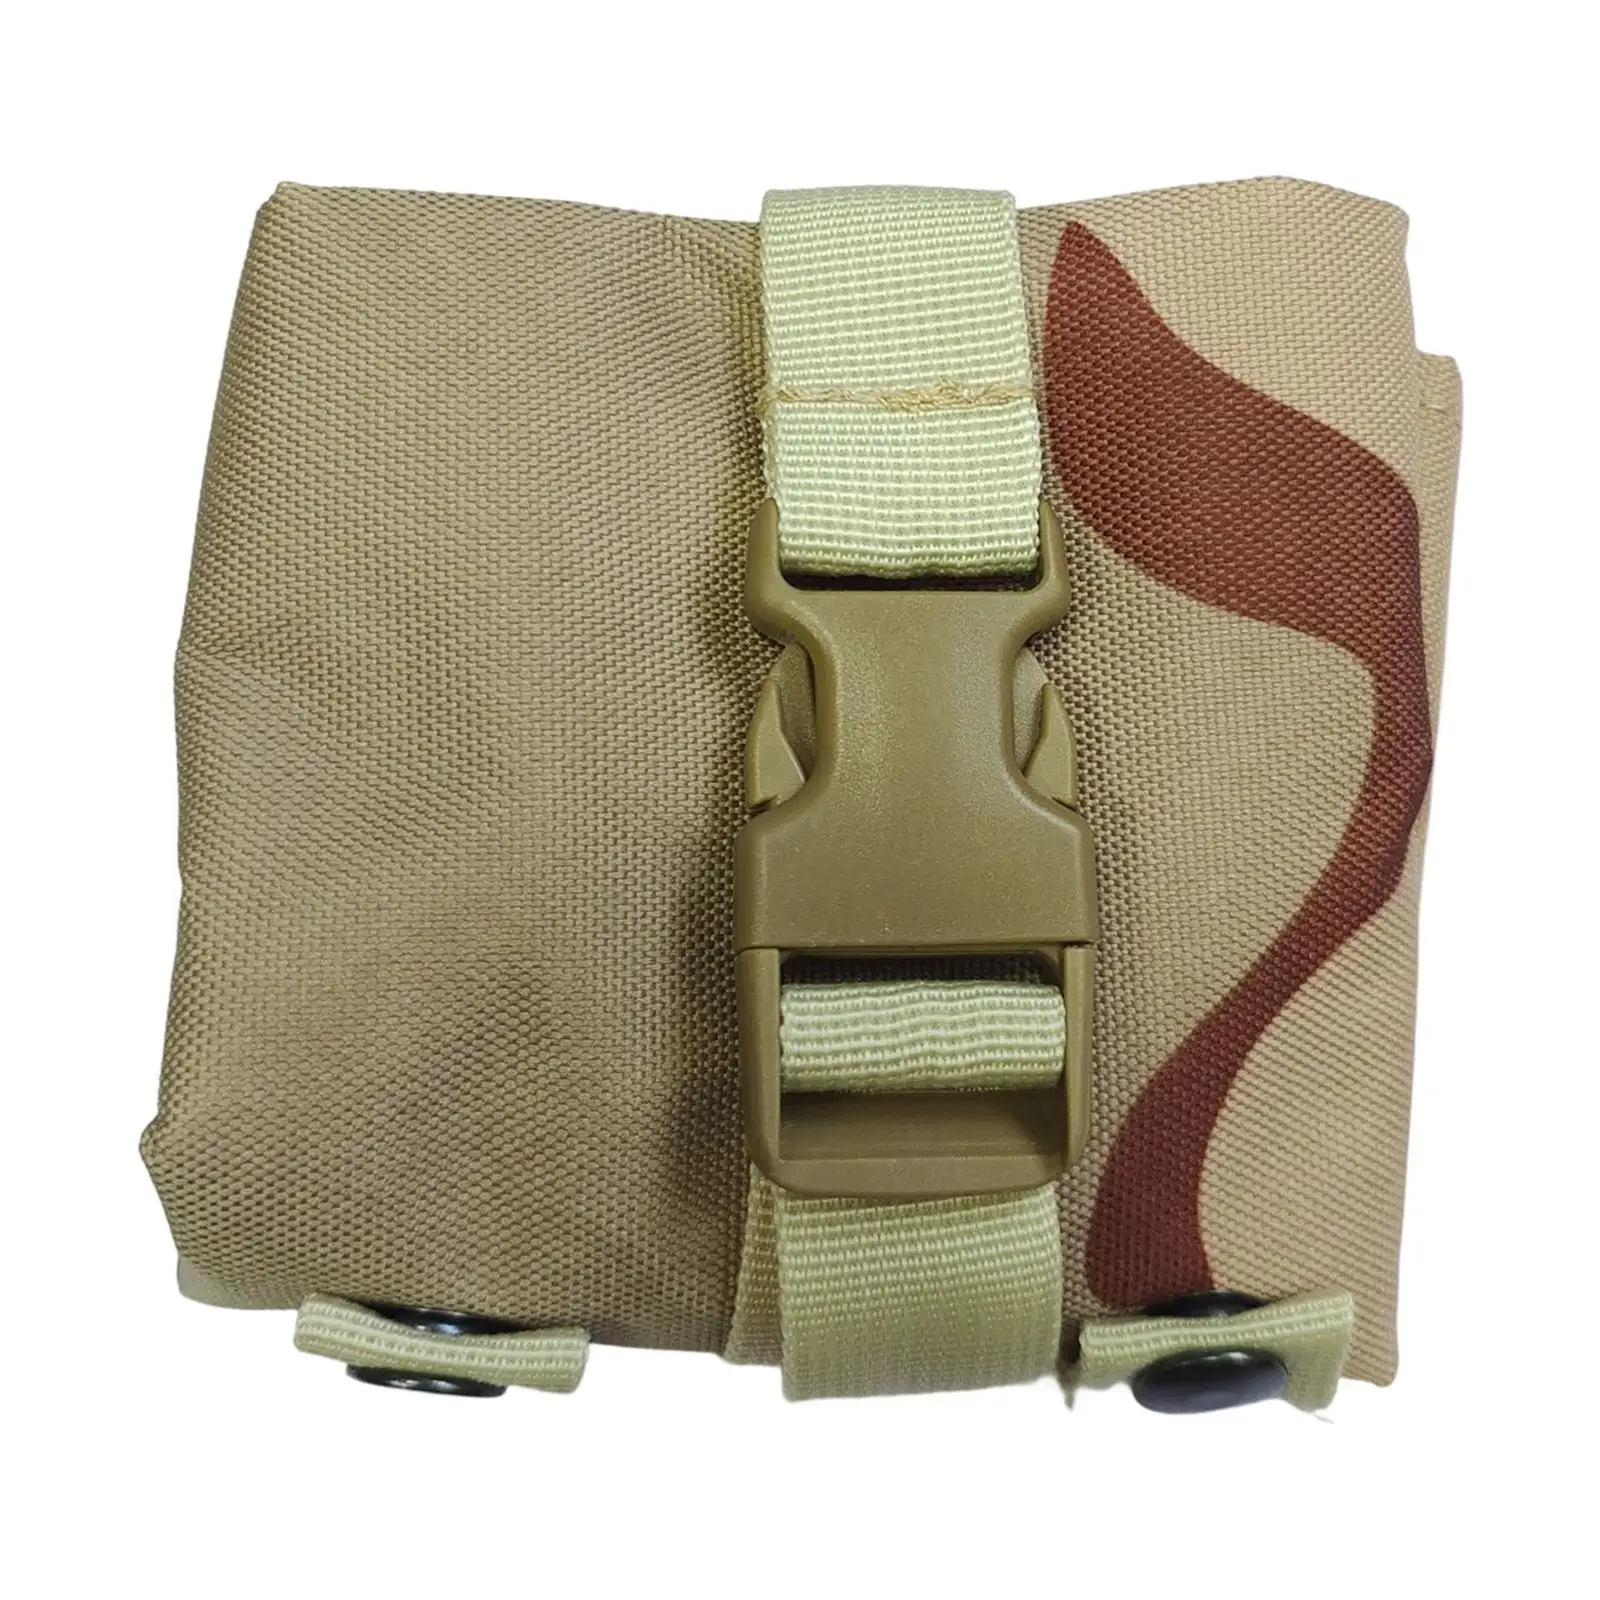 Multipurpose Outdoor Tactical Bag Survival Tool Bag Molle Pouch for Running Hunting Climbing